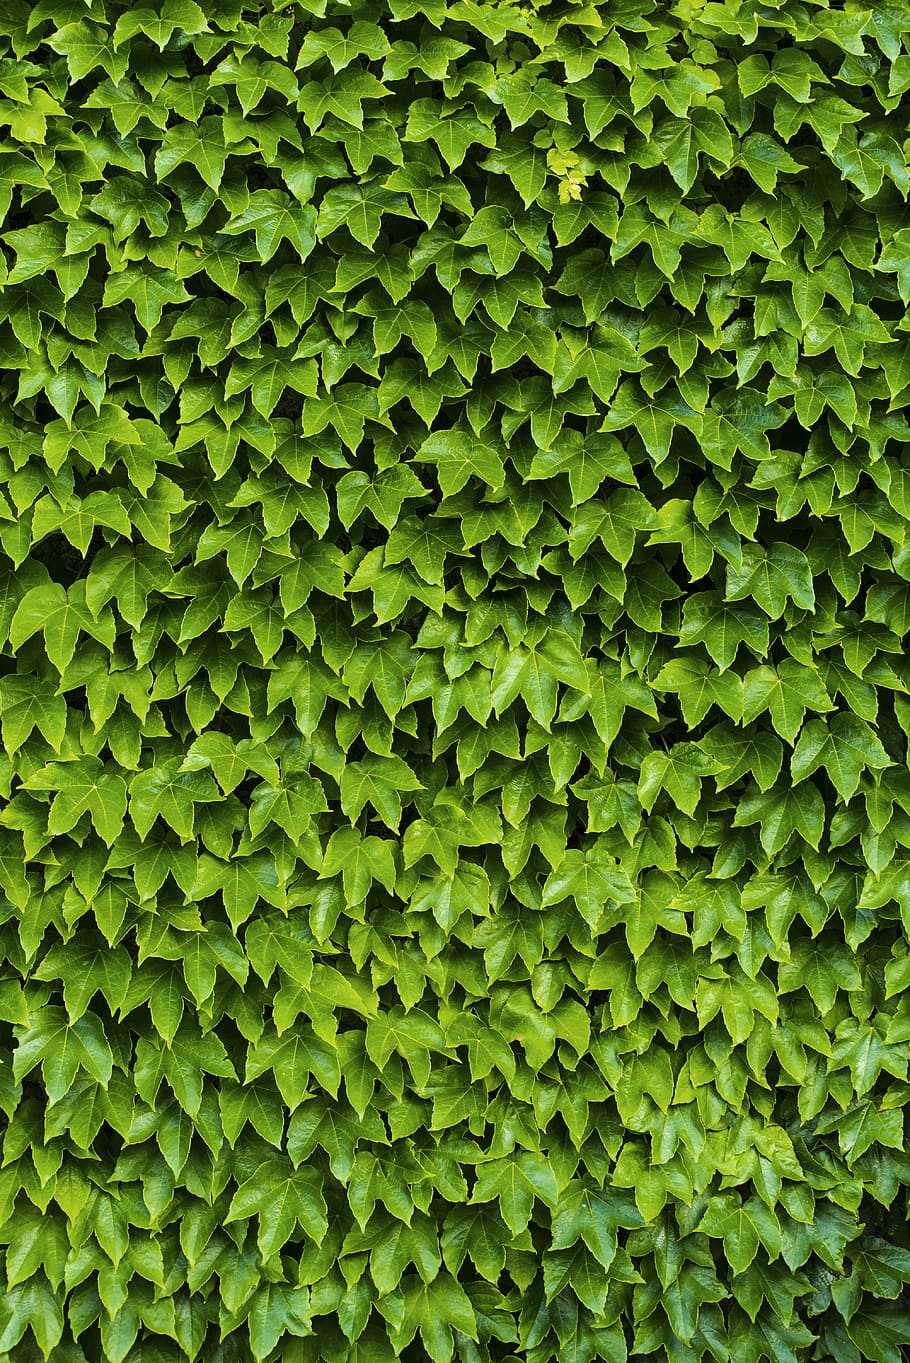 Leaf Texture Hd - Leaf texture hd free stock photos download (6,176